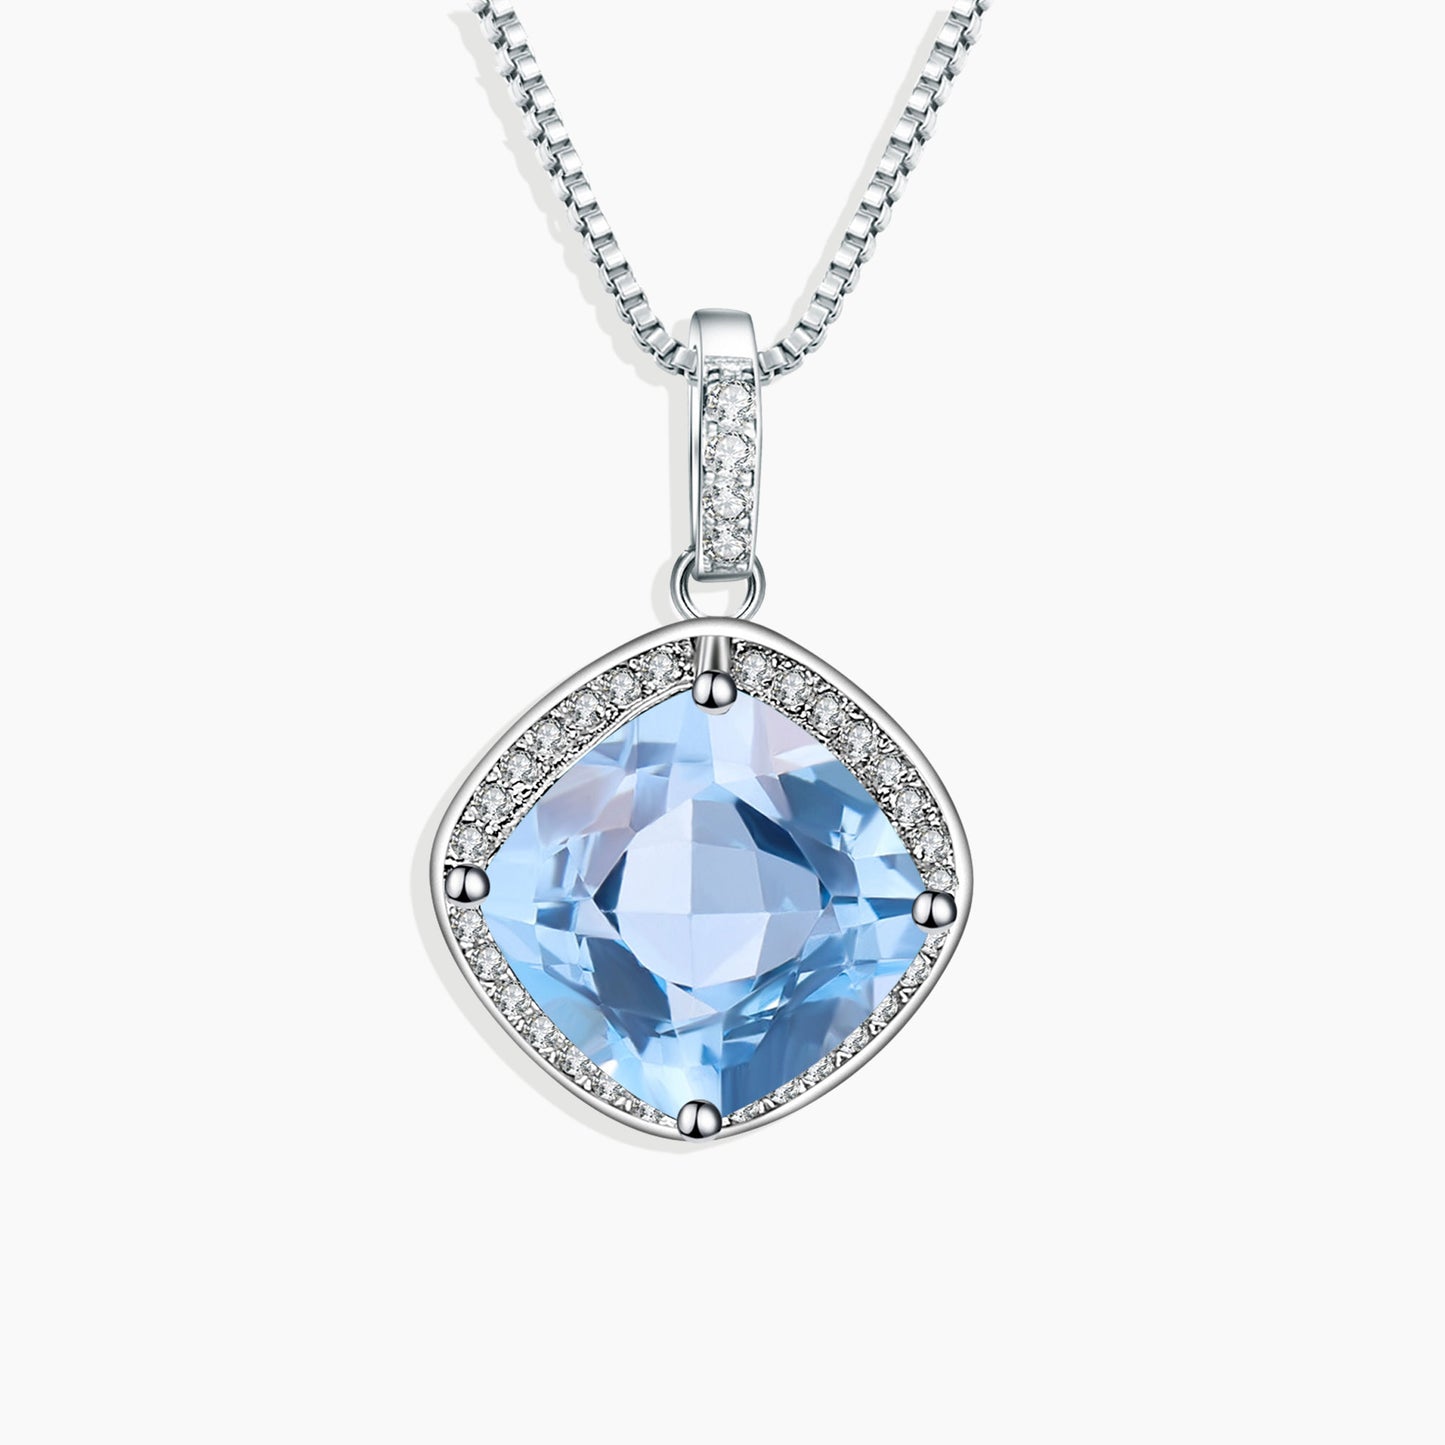 Sky Blue Topaz Cushion Cut Pendant Necklace in Sterling Silver